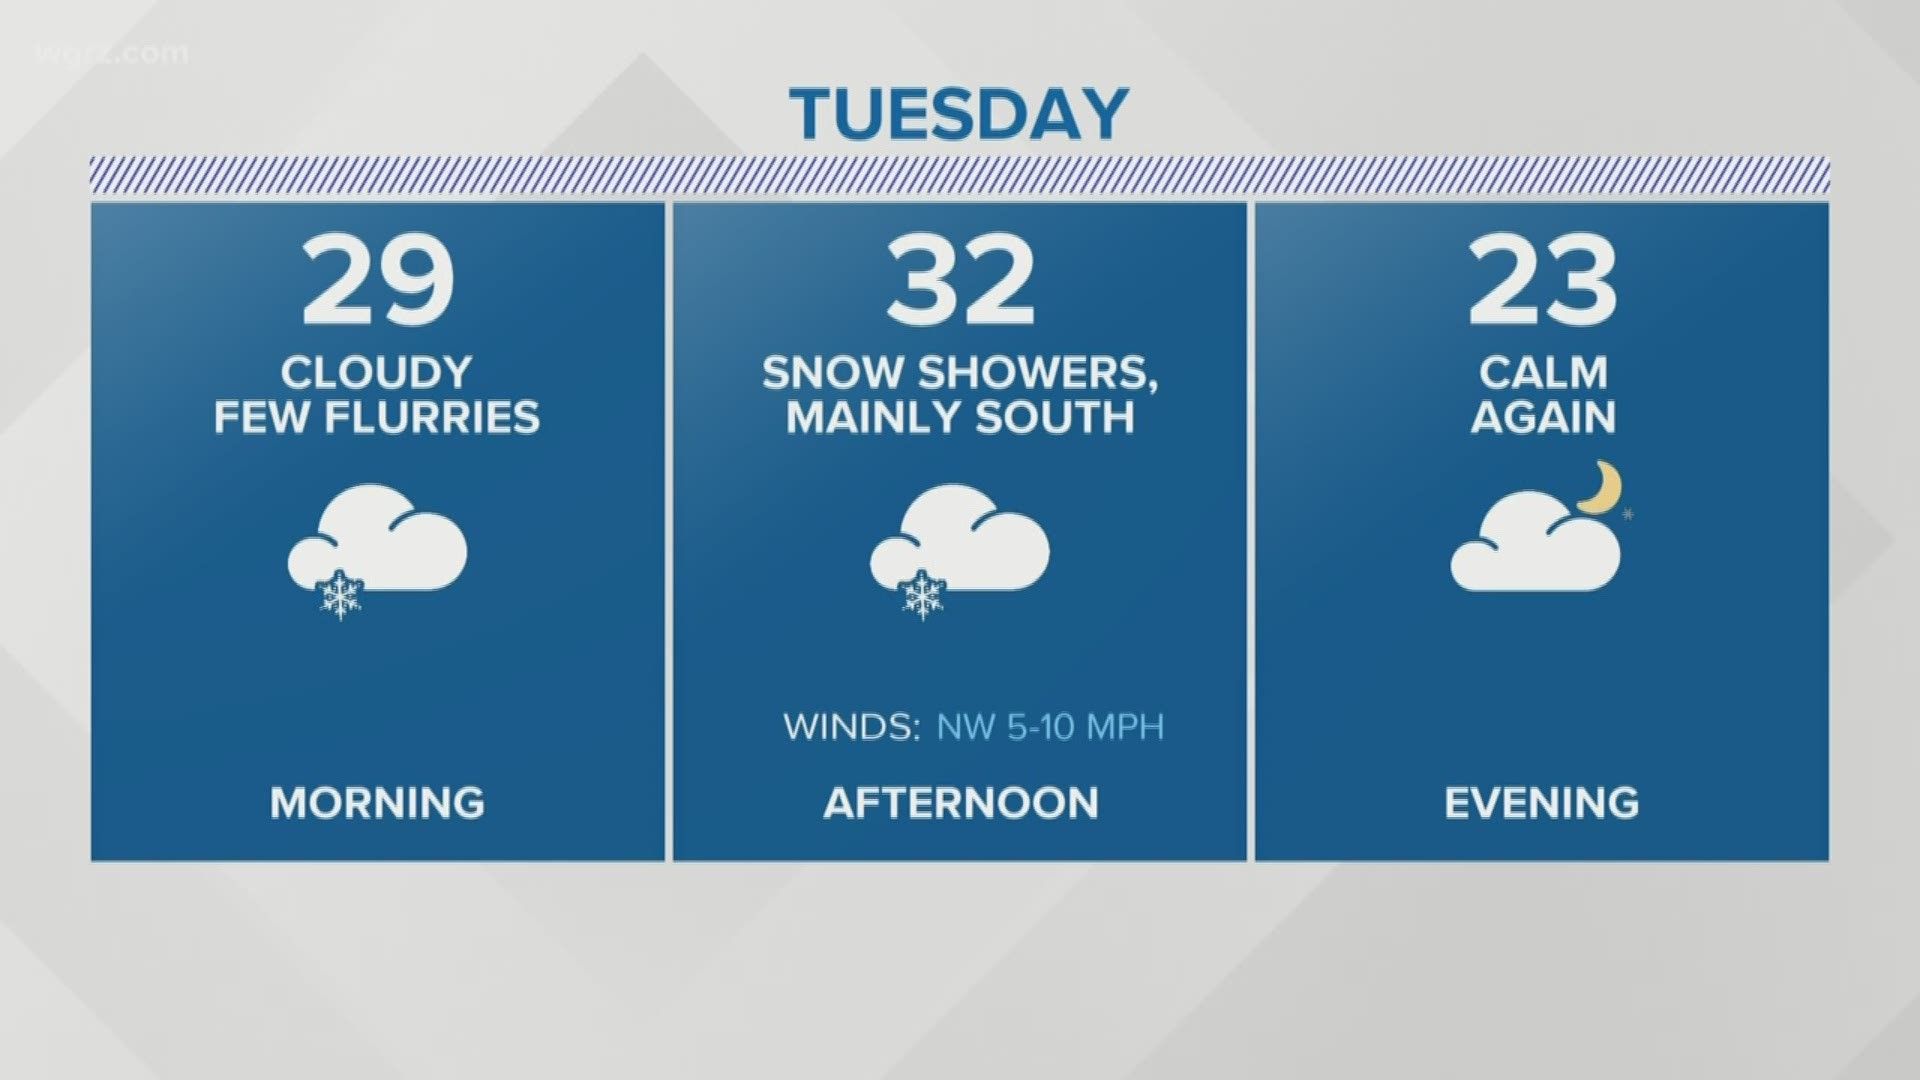 Tonight into tomorrow shows an uptick in snow showers overnight. Some lake enhanced showers are possible during the morning commute on Tuesday.